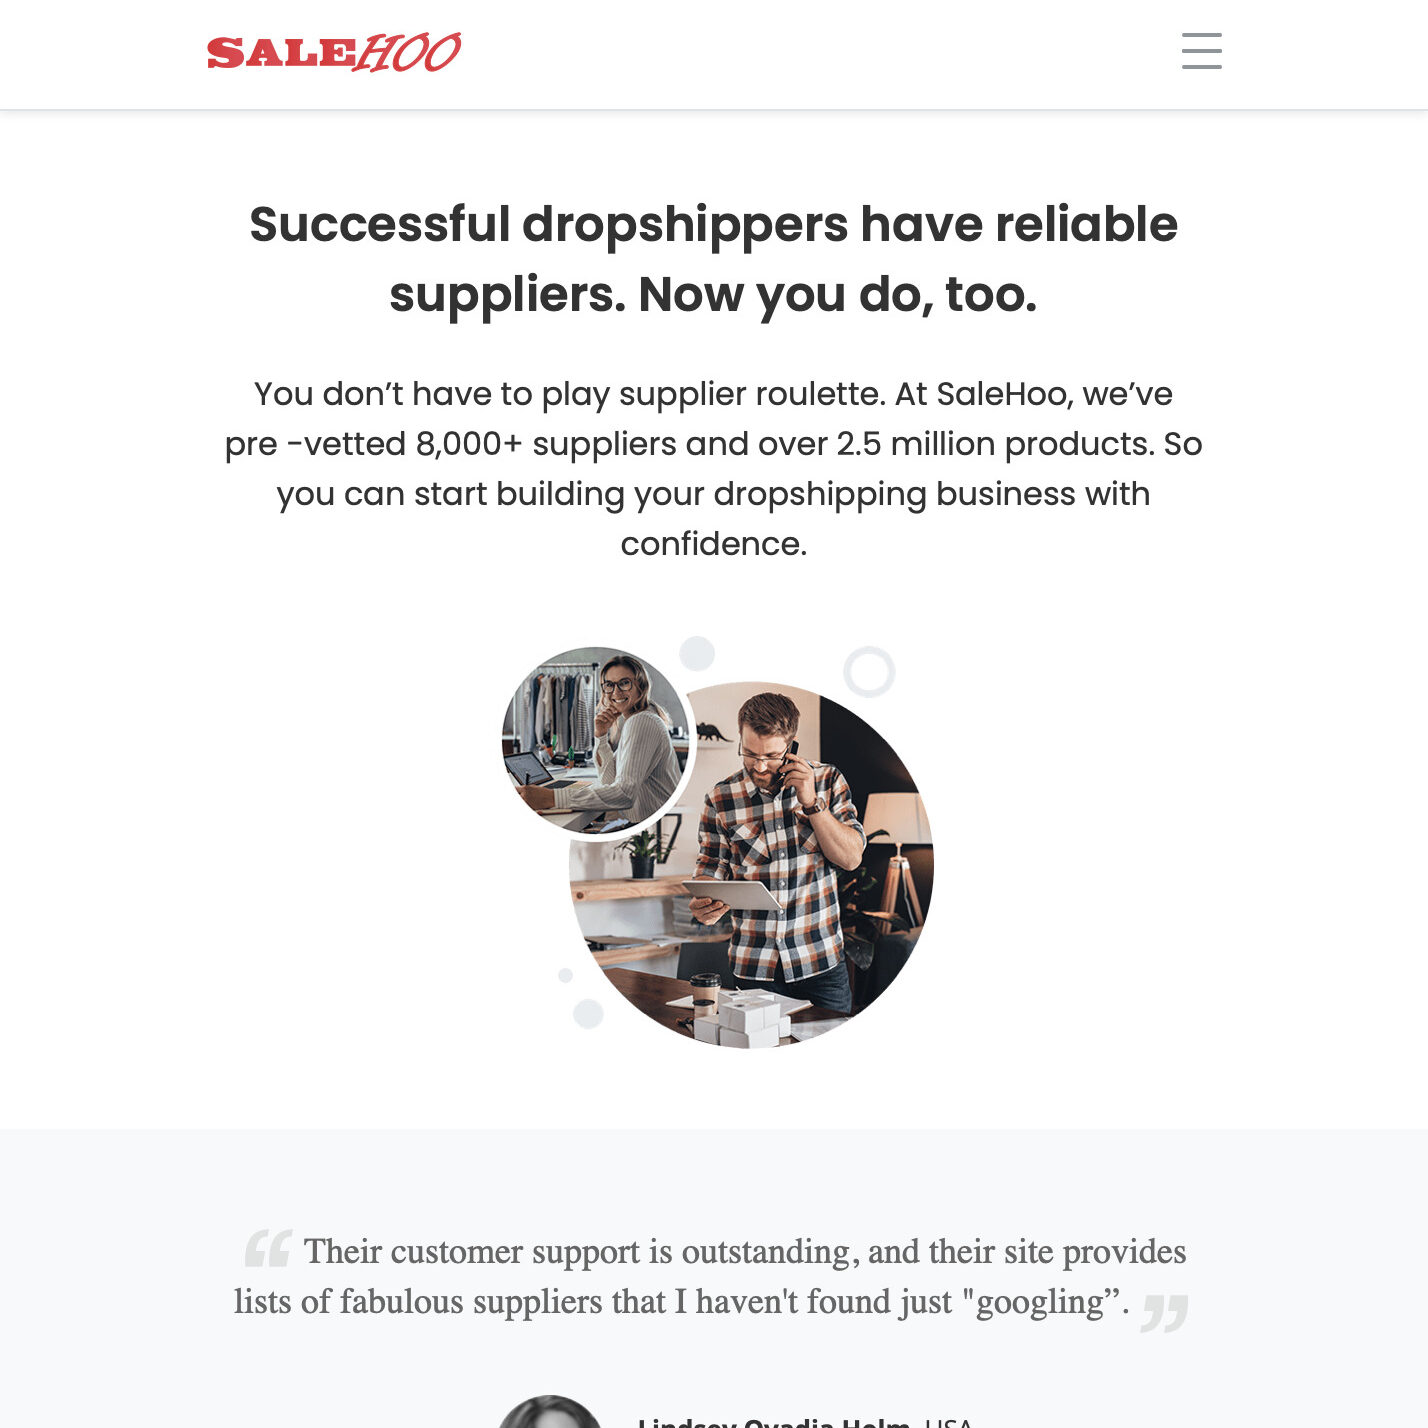 SaleHoo | Dropshipping suppliers in India